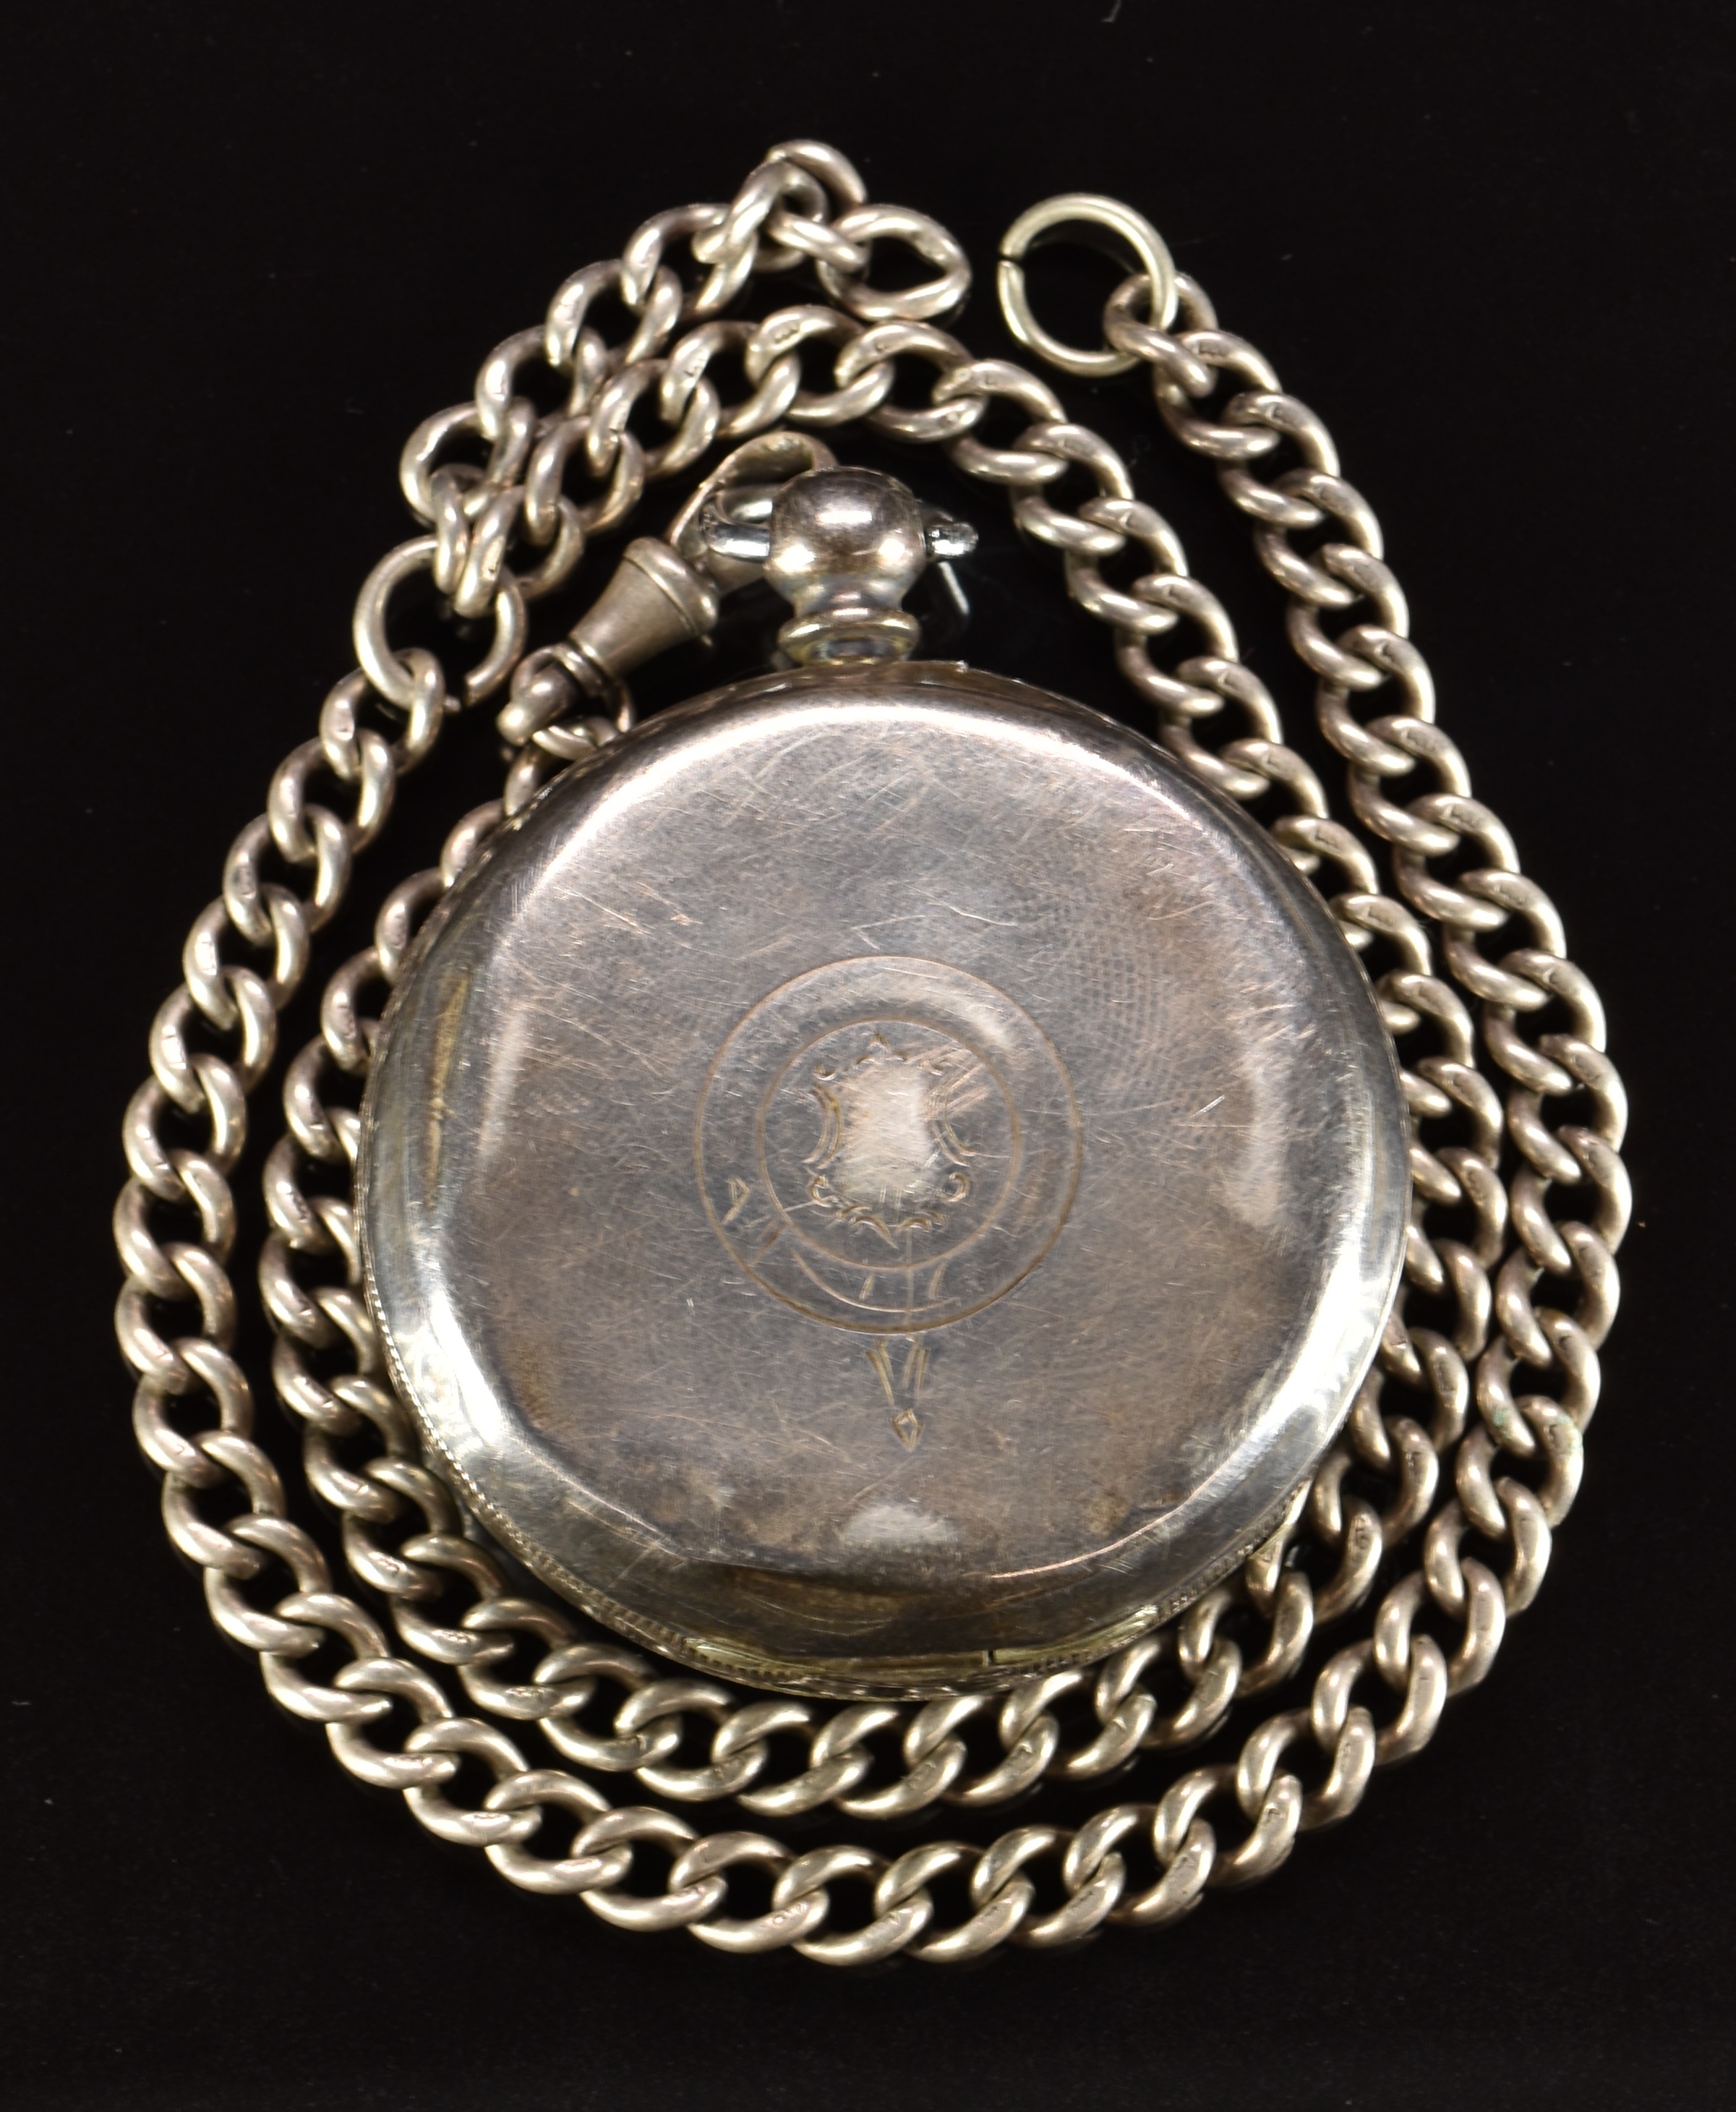 Kay & Company silver open faced pocket watch with inset subsidiary seconds dial, blued hands, - Image 2 of 2